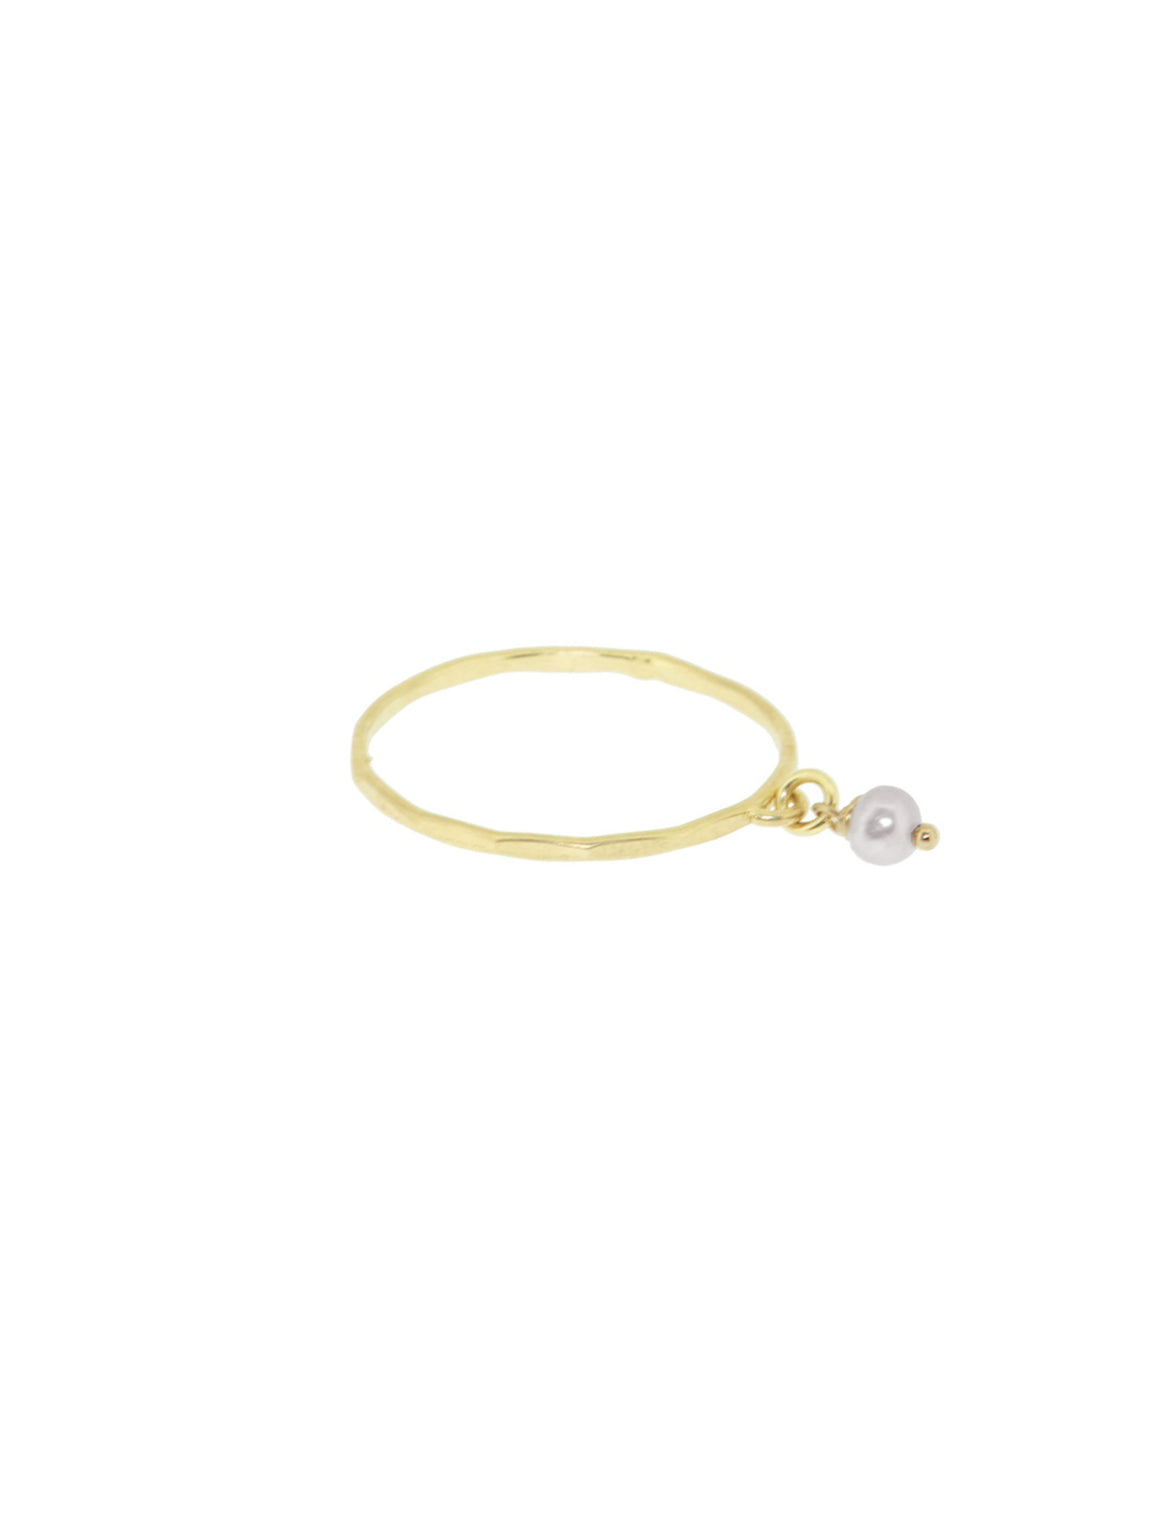 Baby bird - Grey Pearl | 14K Gold Plated